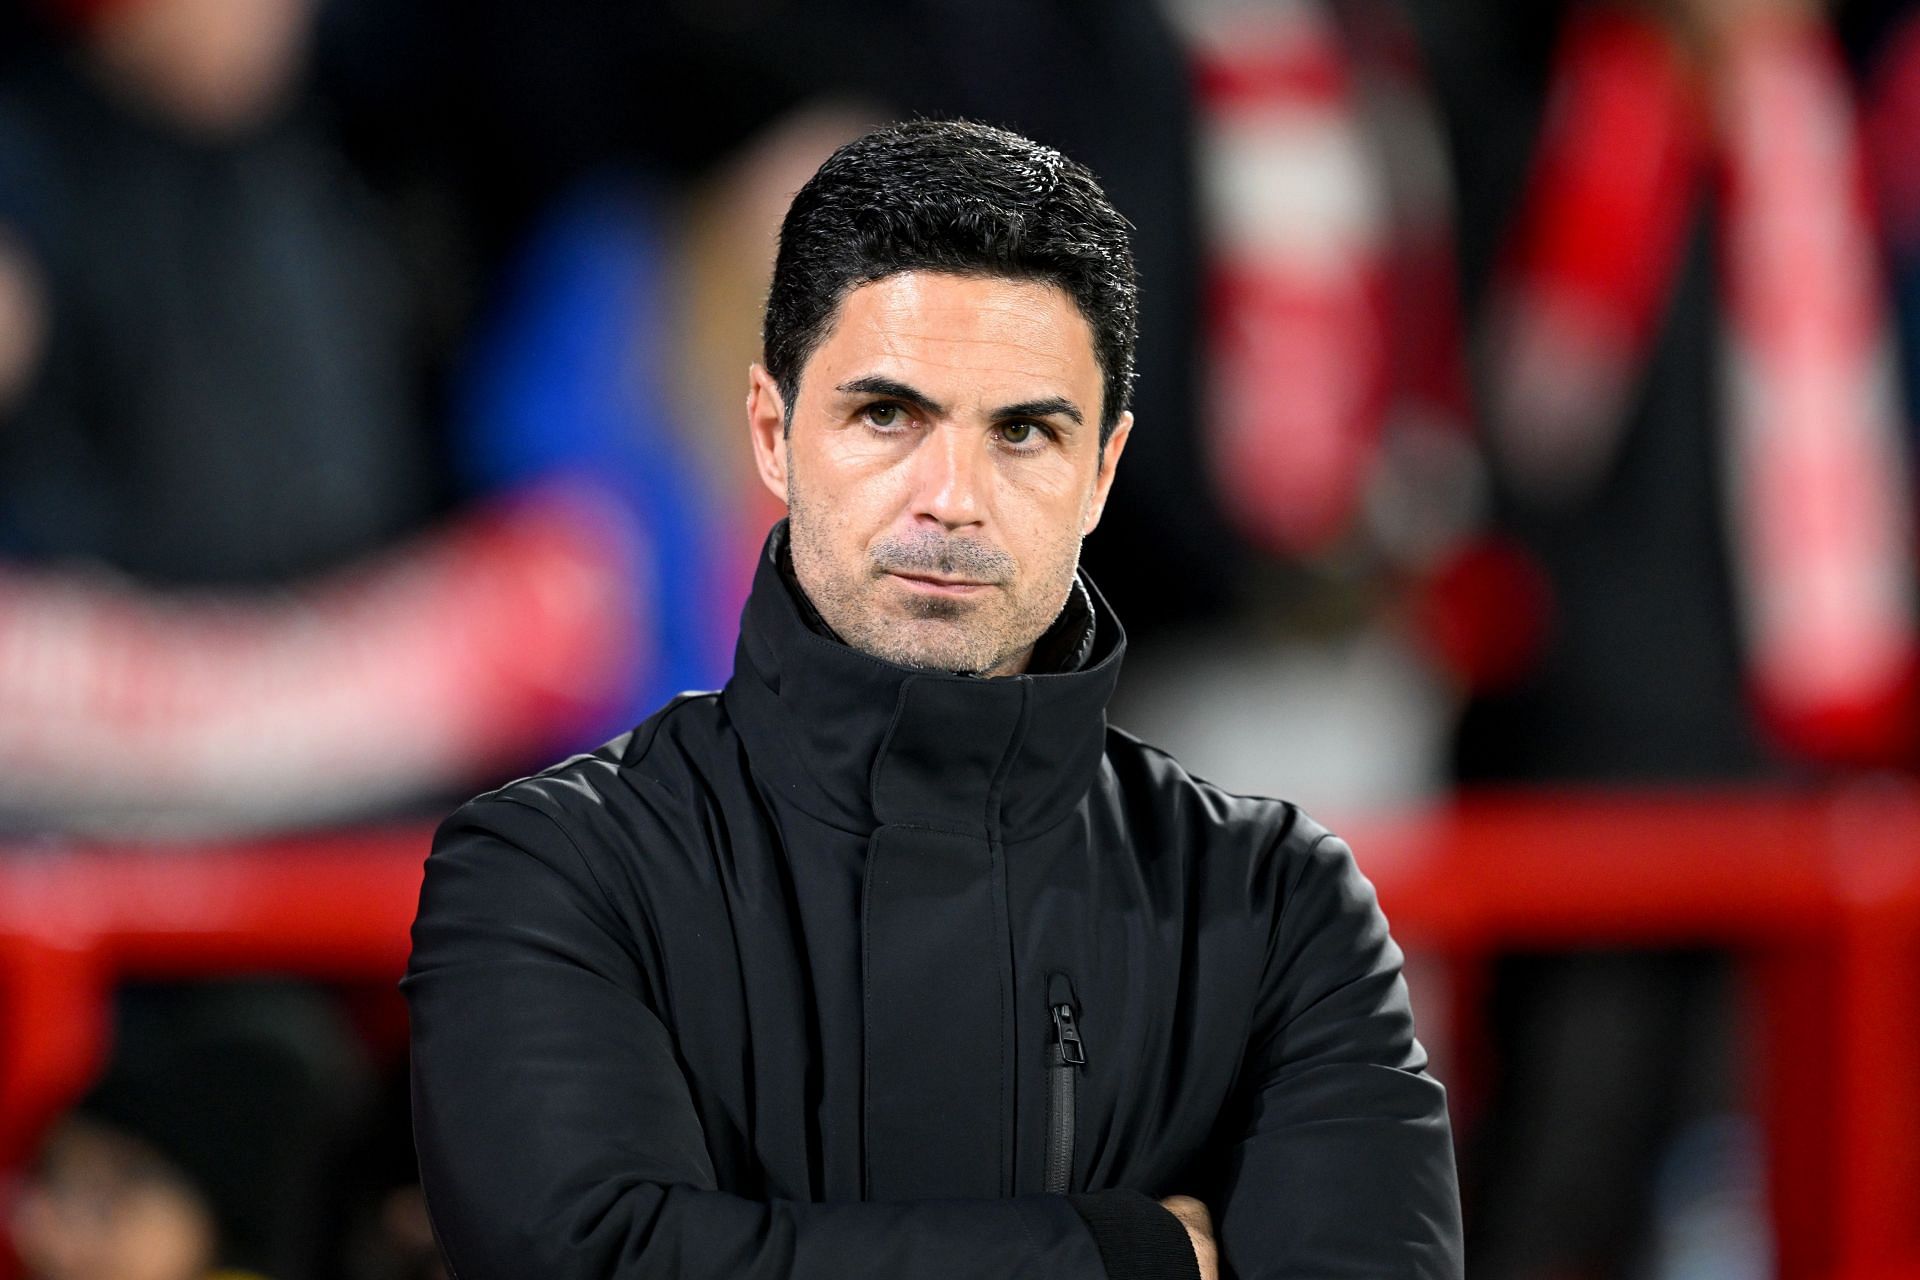 Mikel Arteta could be an option for the hot seat at Camp Nou